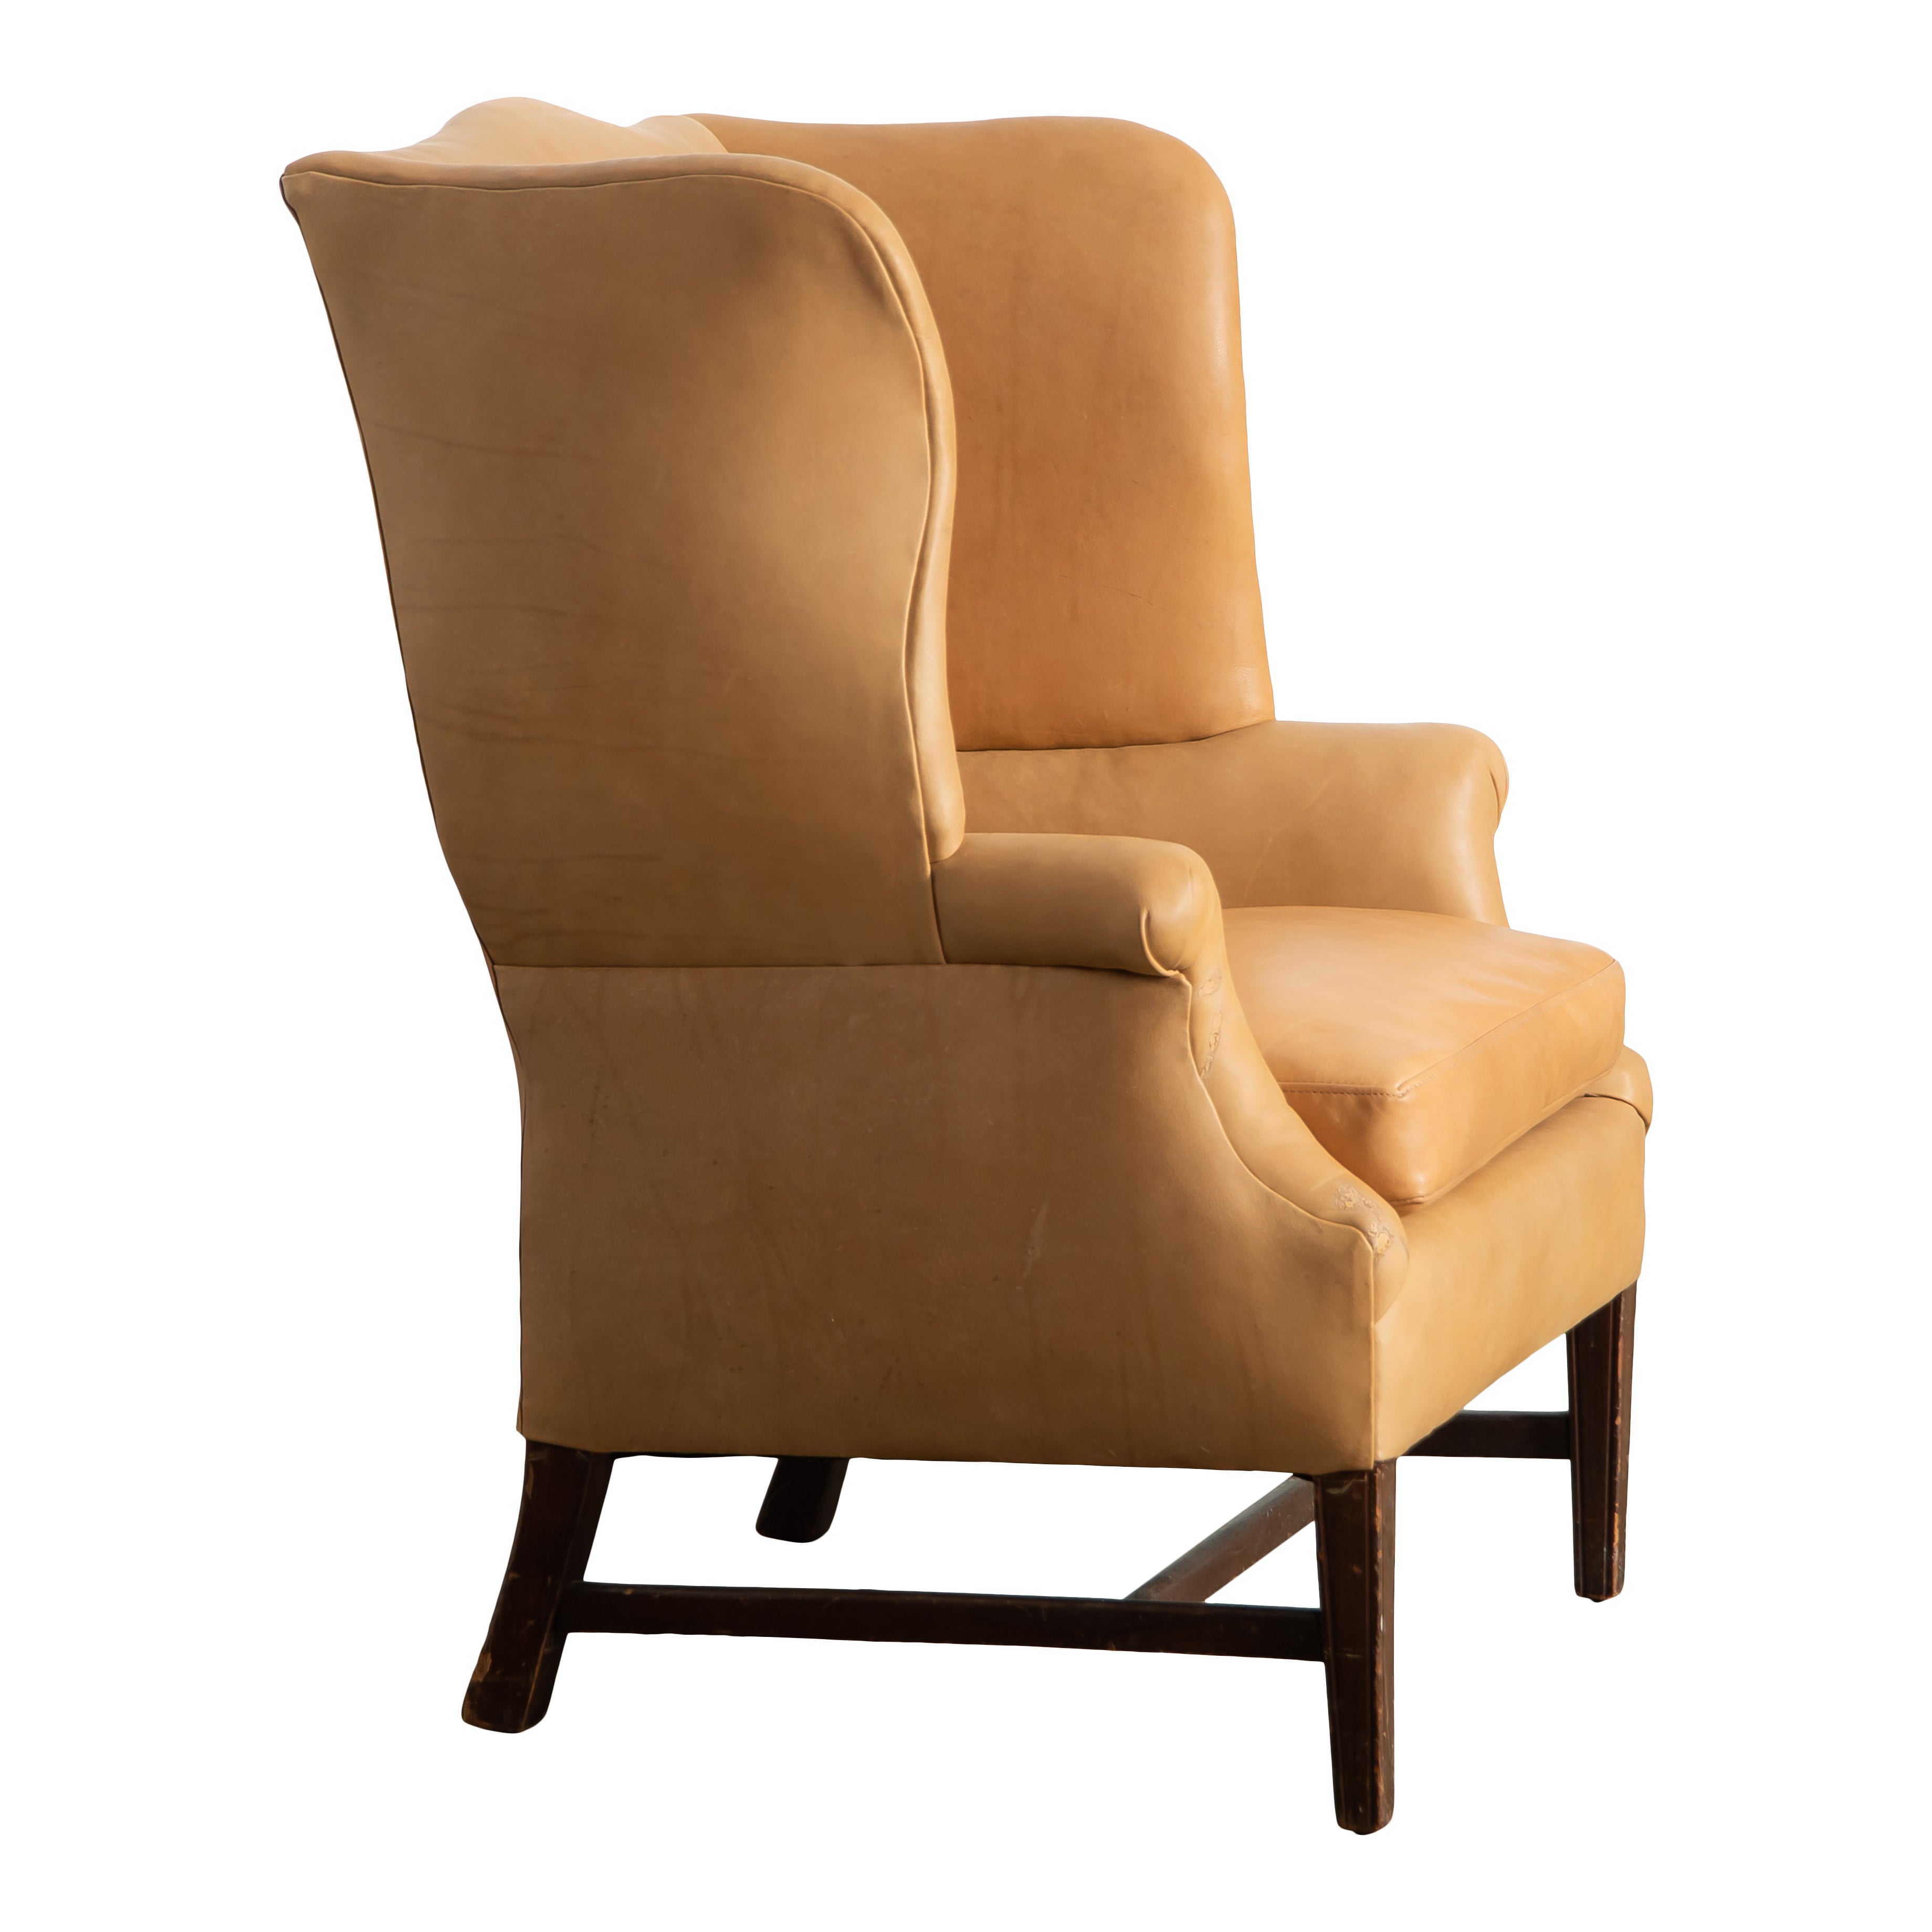 Sumner Leather Chair